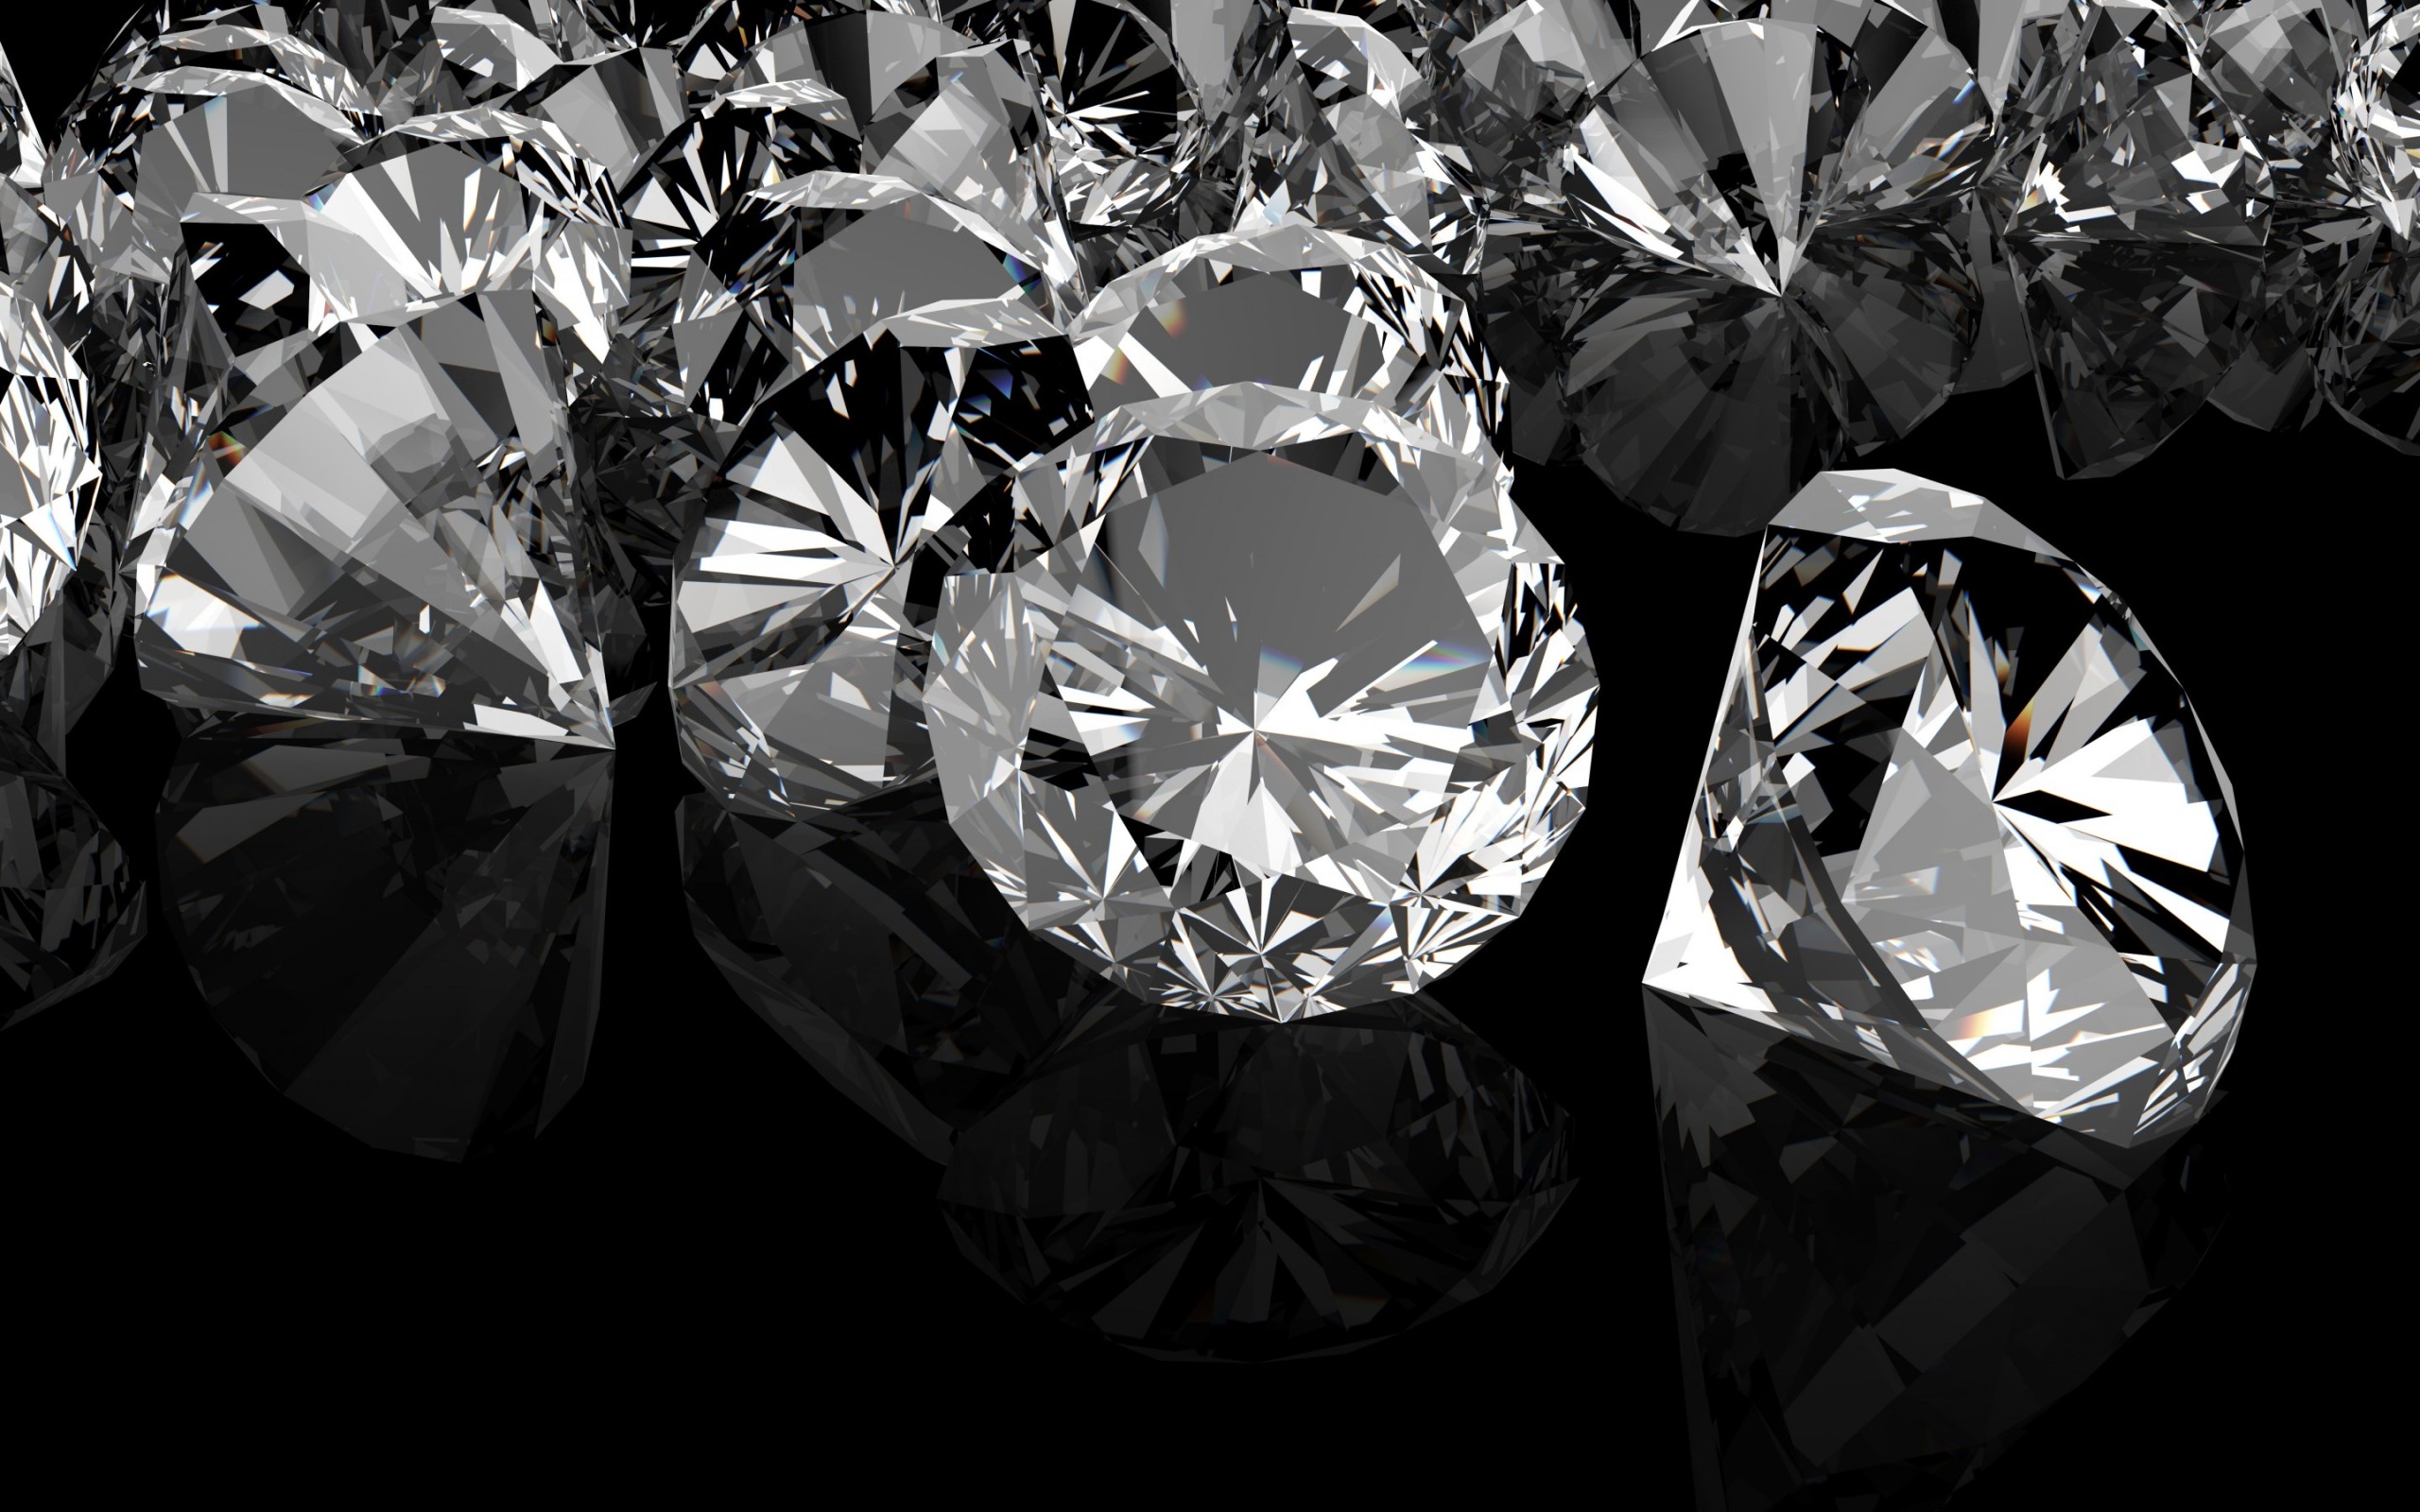 Free Diamond Backgrounds | Wallpapers, Backgrounds, Images, Art ...